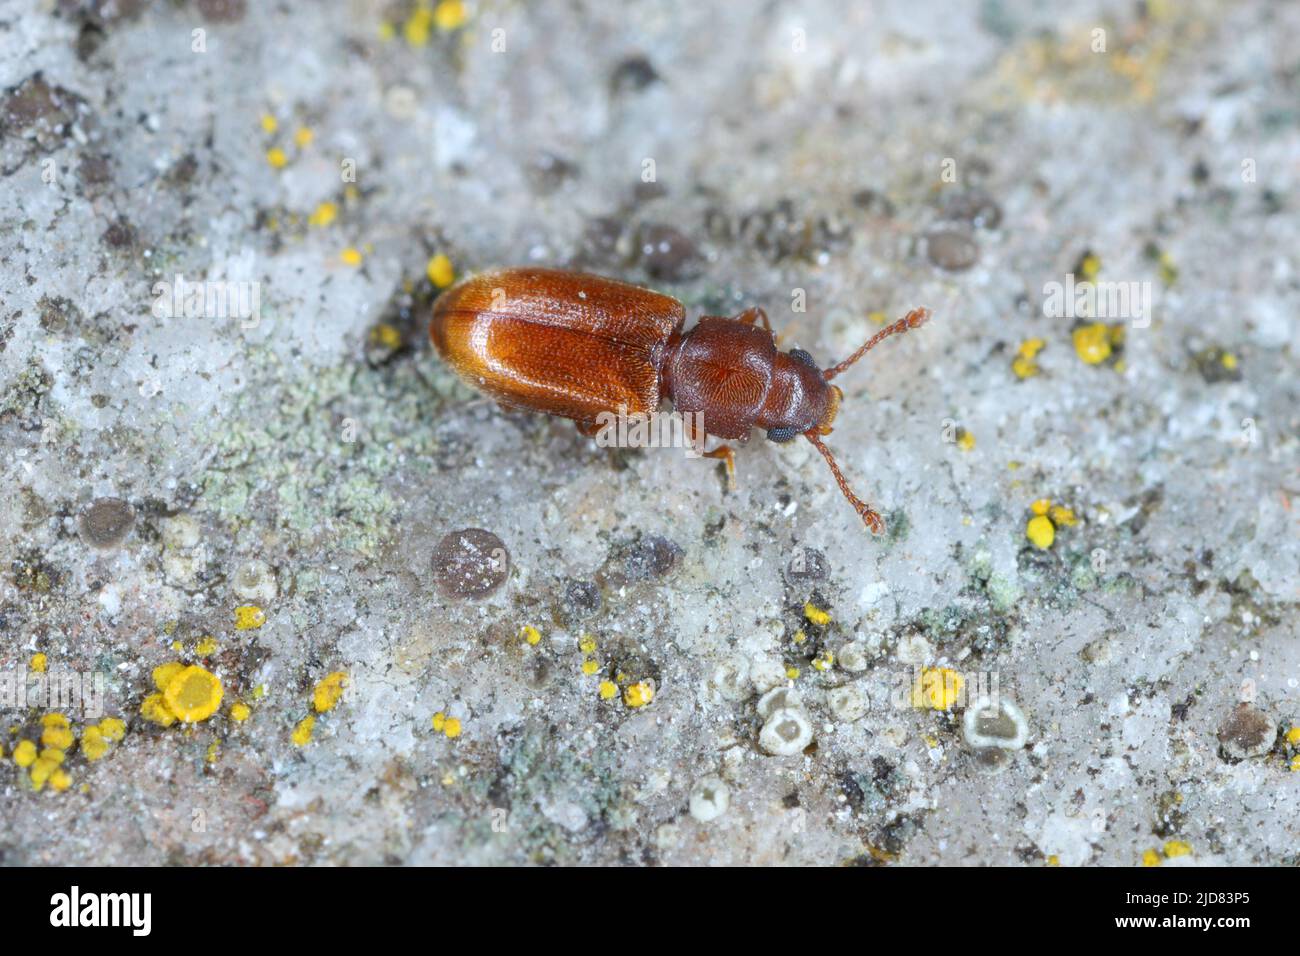 The foreign grain beetle (Ahasverus advena) is a species of beetle in the family Silvanidae. It is related to the sawtoothed grain beetle. The beetle. Stock Photo